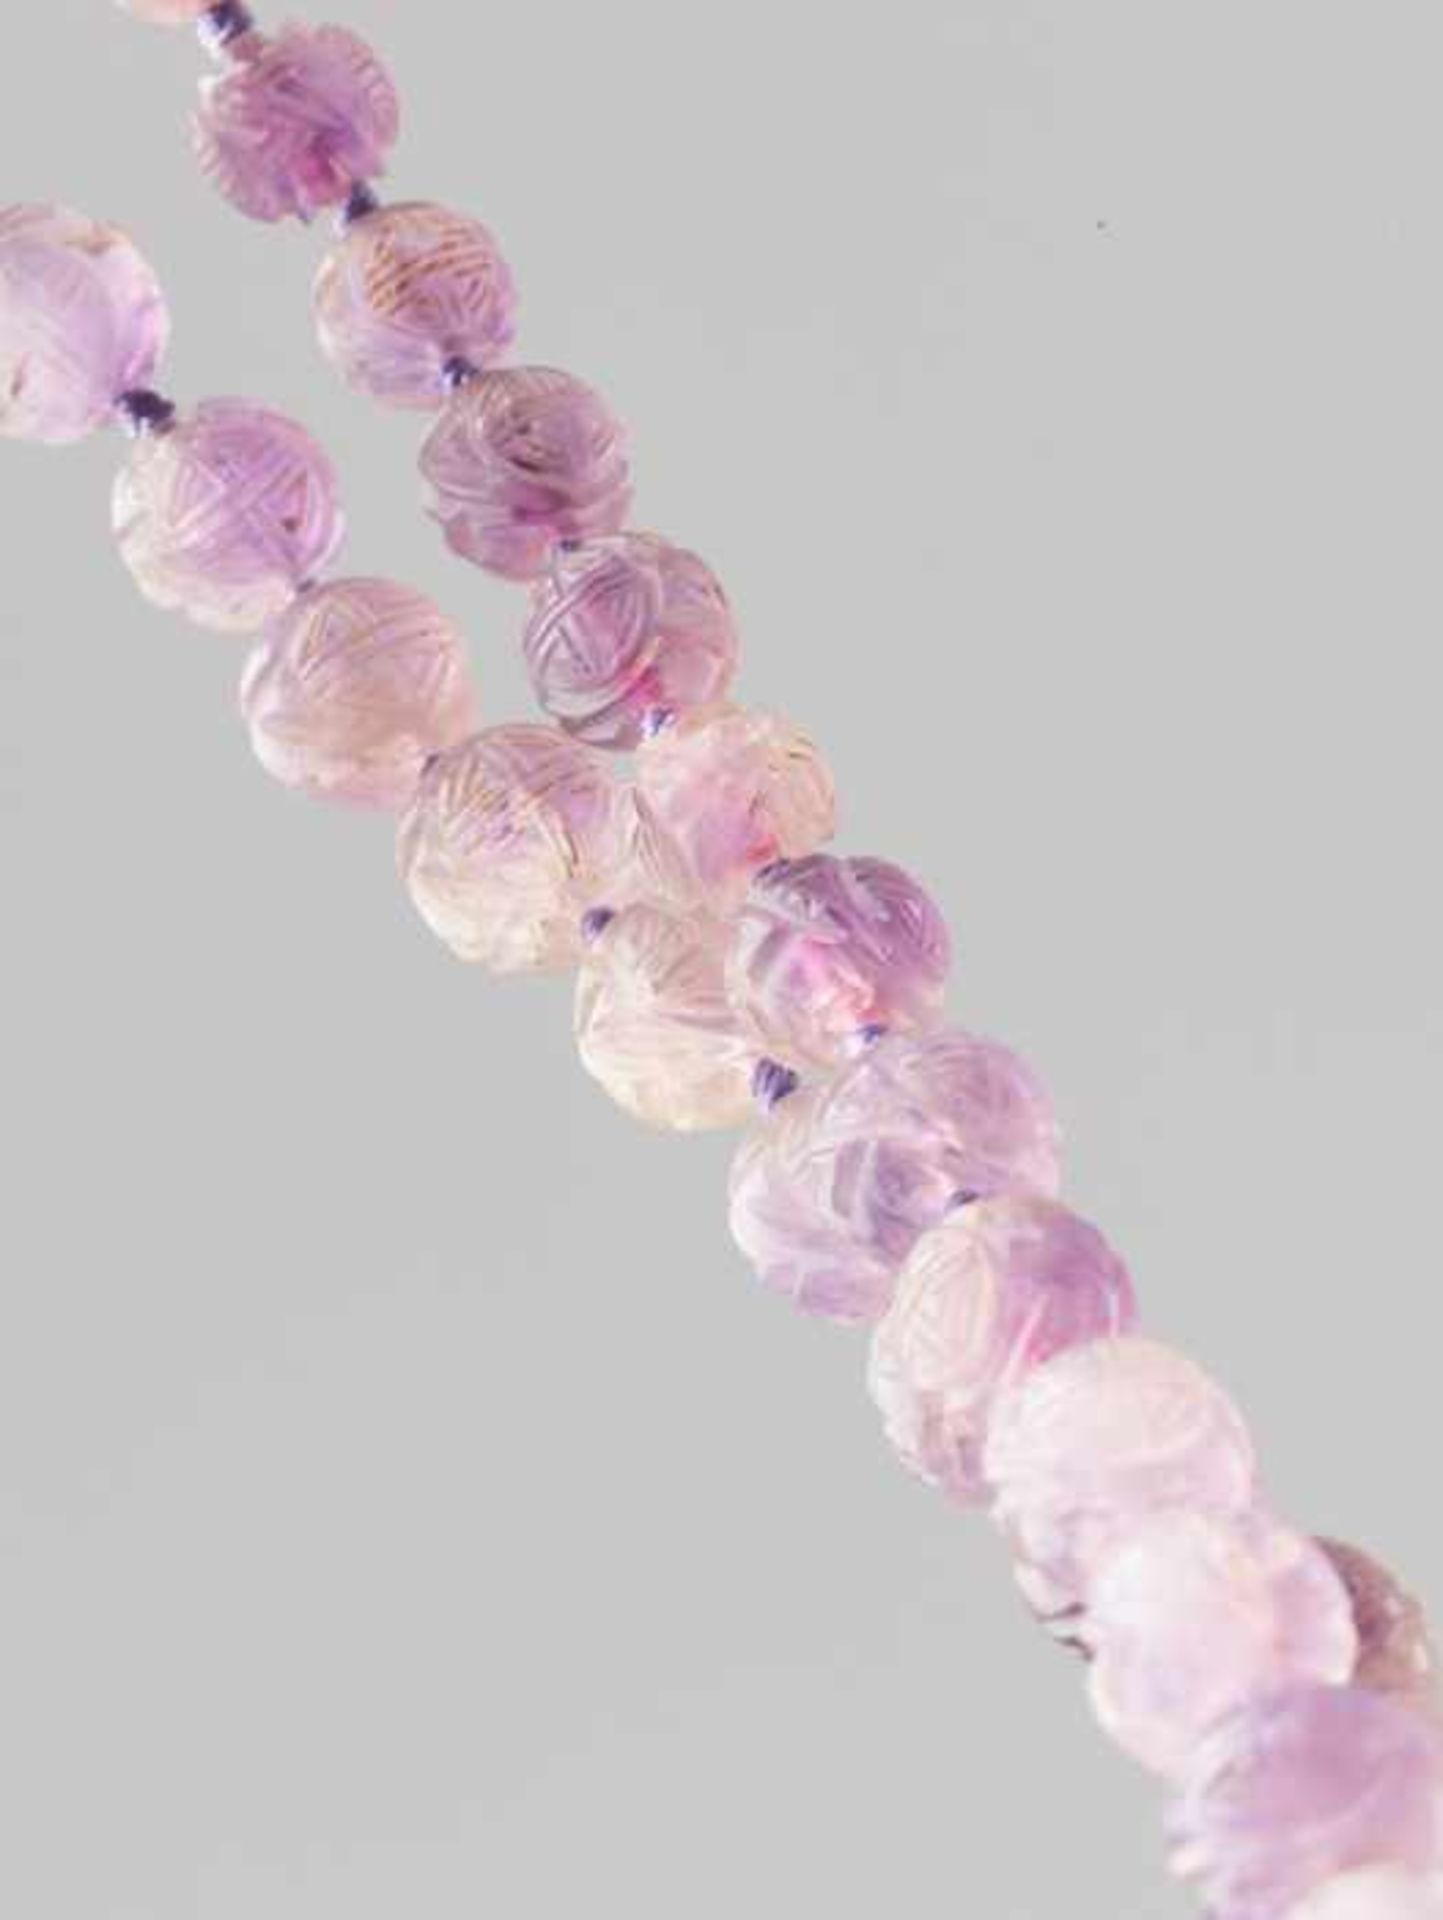 AN AMETHYST BEAD ‘SHOU’ NECKLACE, 56 BEADS, QING DYNASTY The amethyst beads with varying colors from - Image 3 of 4